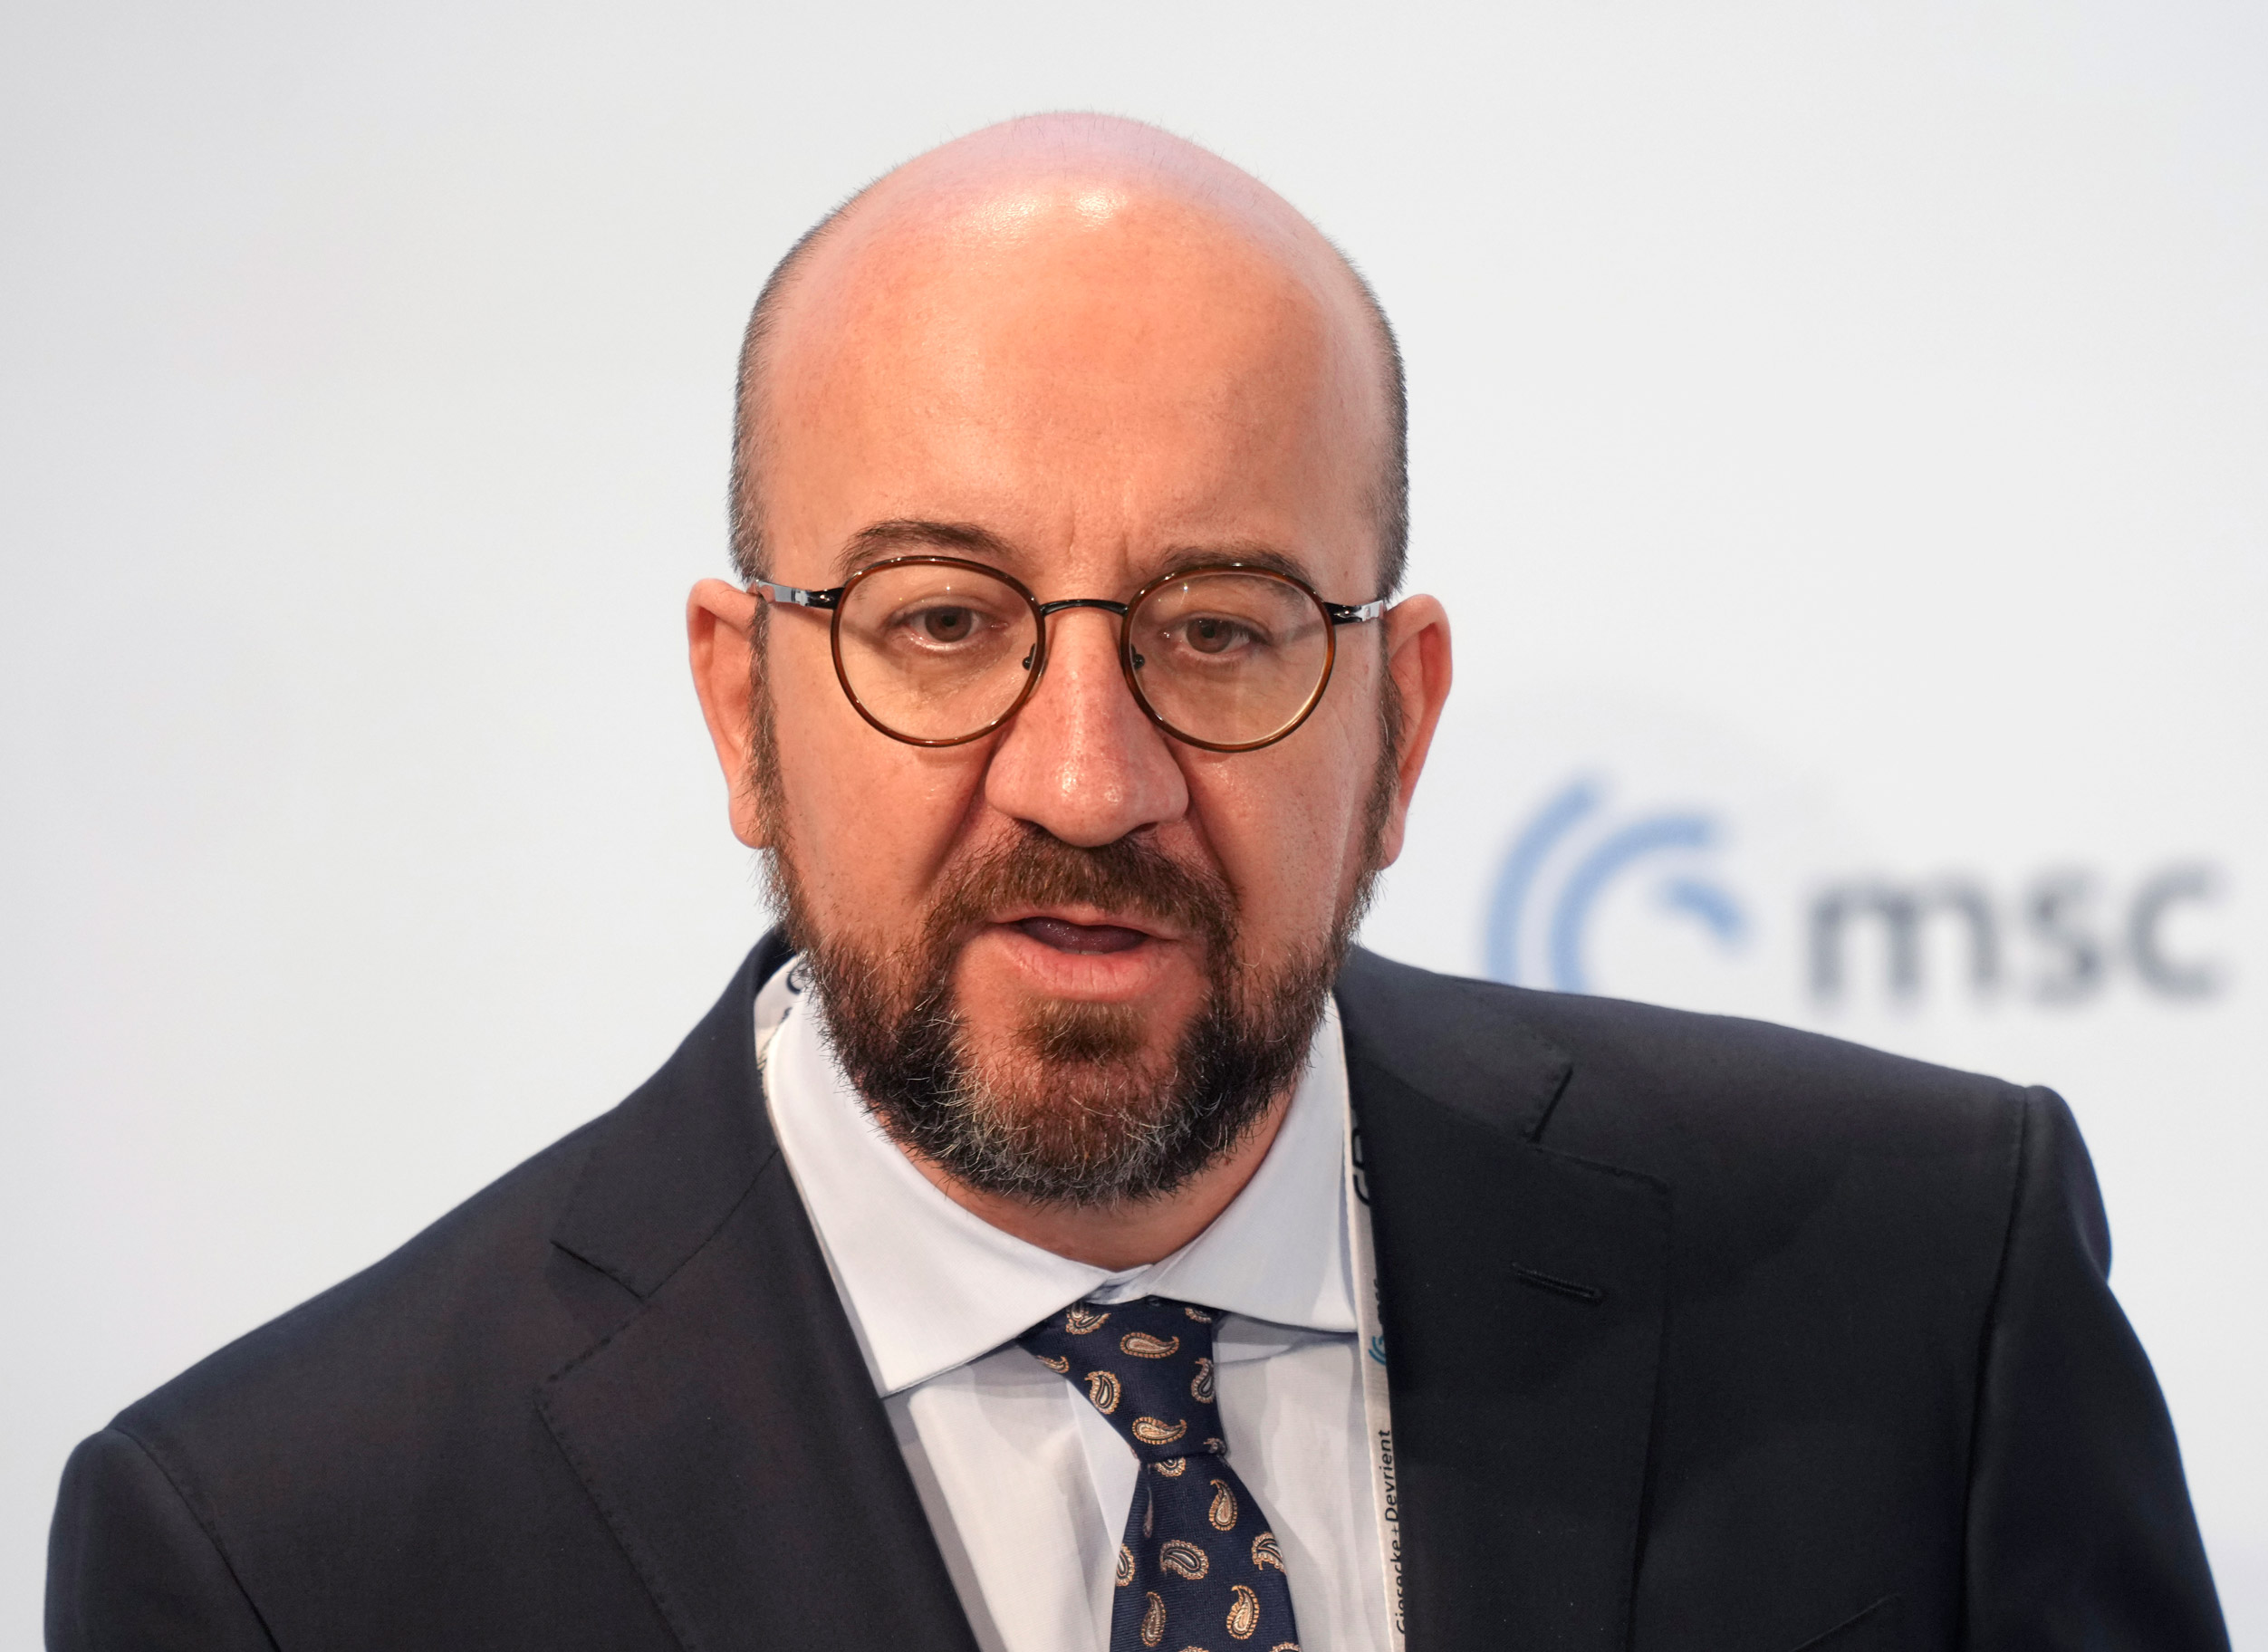 President of the European Council Charles Michel speaks at the Munich Security Conference on Feb. 20.